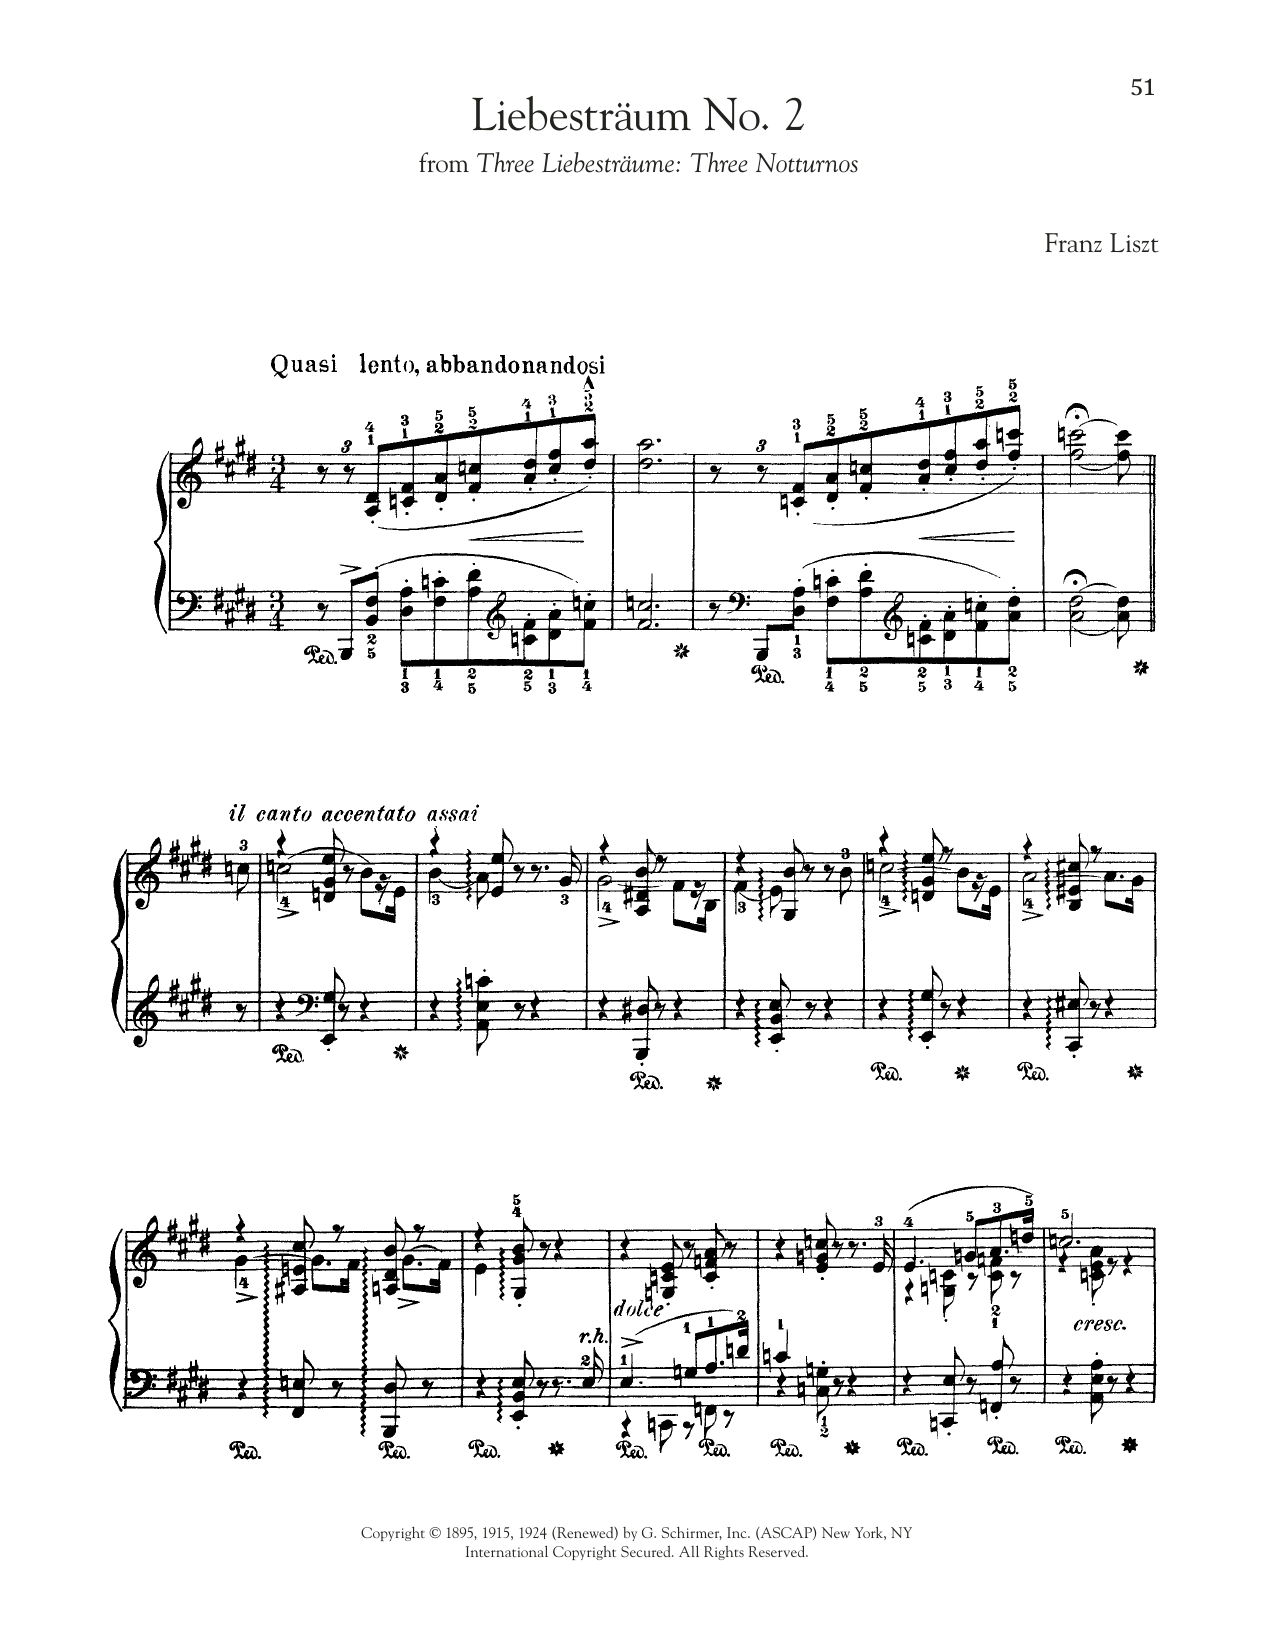 Franz Liszt Liebestraum No. 2 In E-Flat Major sheet music preview music notes and score for Piano Solo including 5 page(s)